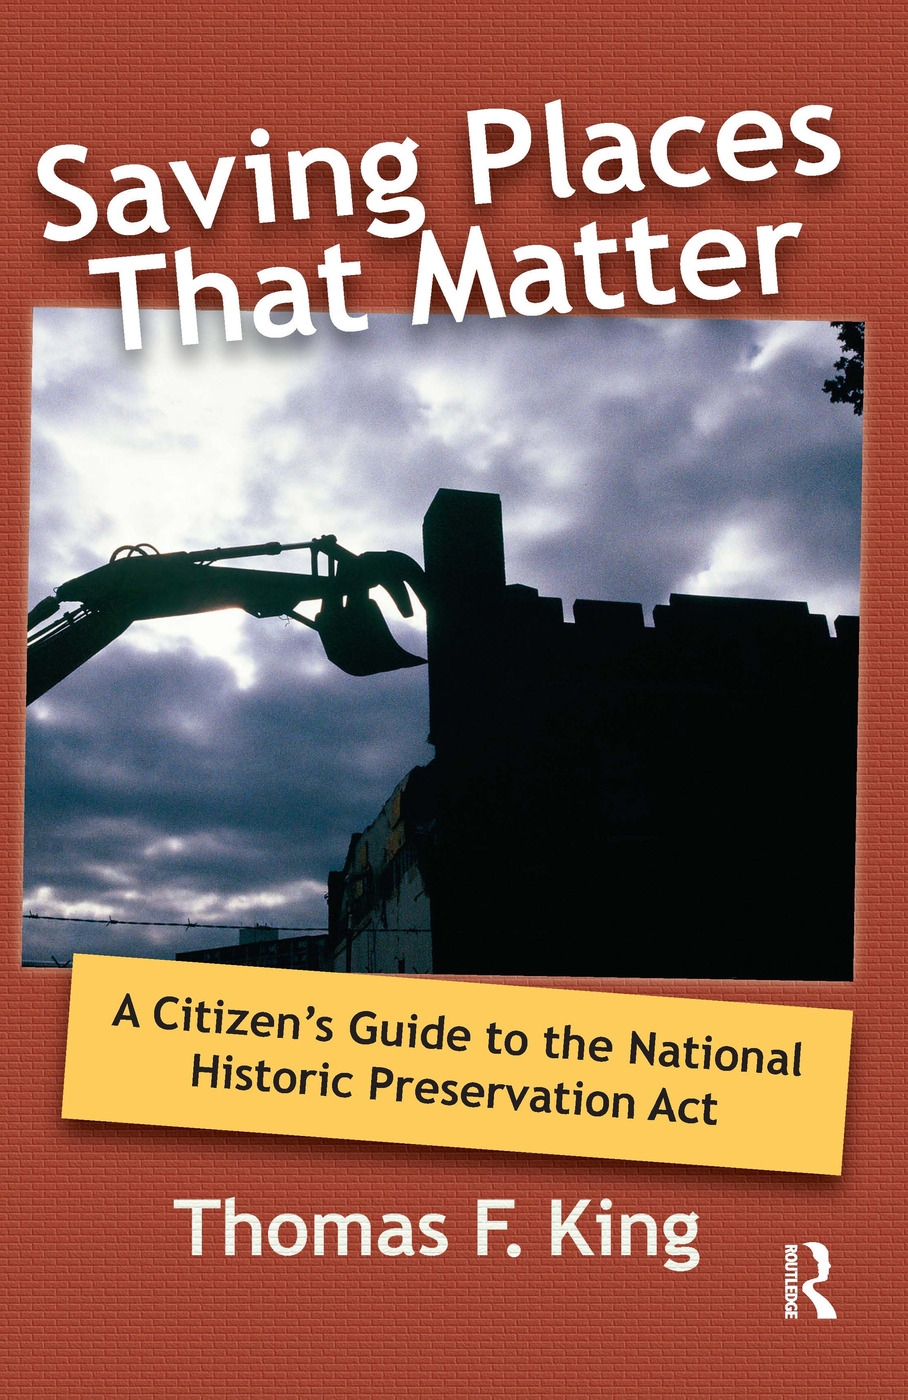 Saving Places That Matter: A Citizen’s Guide to the National Historic Preservation Act